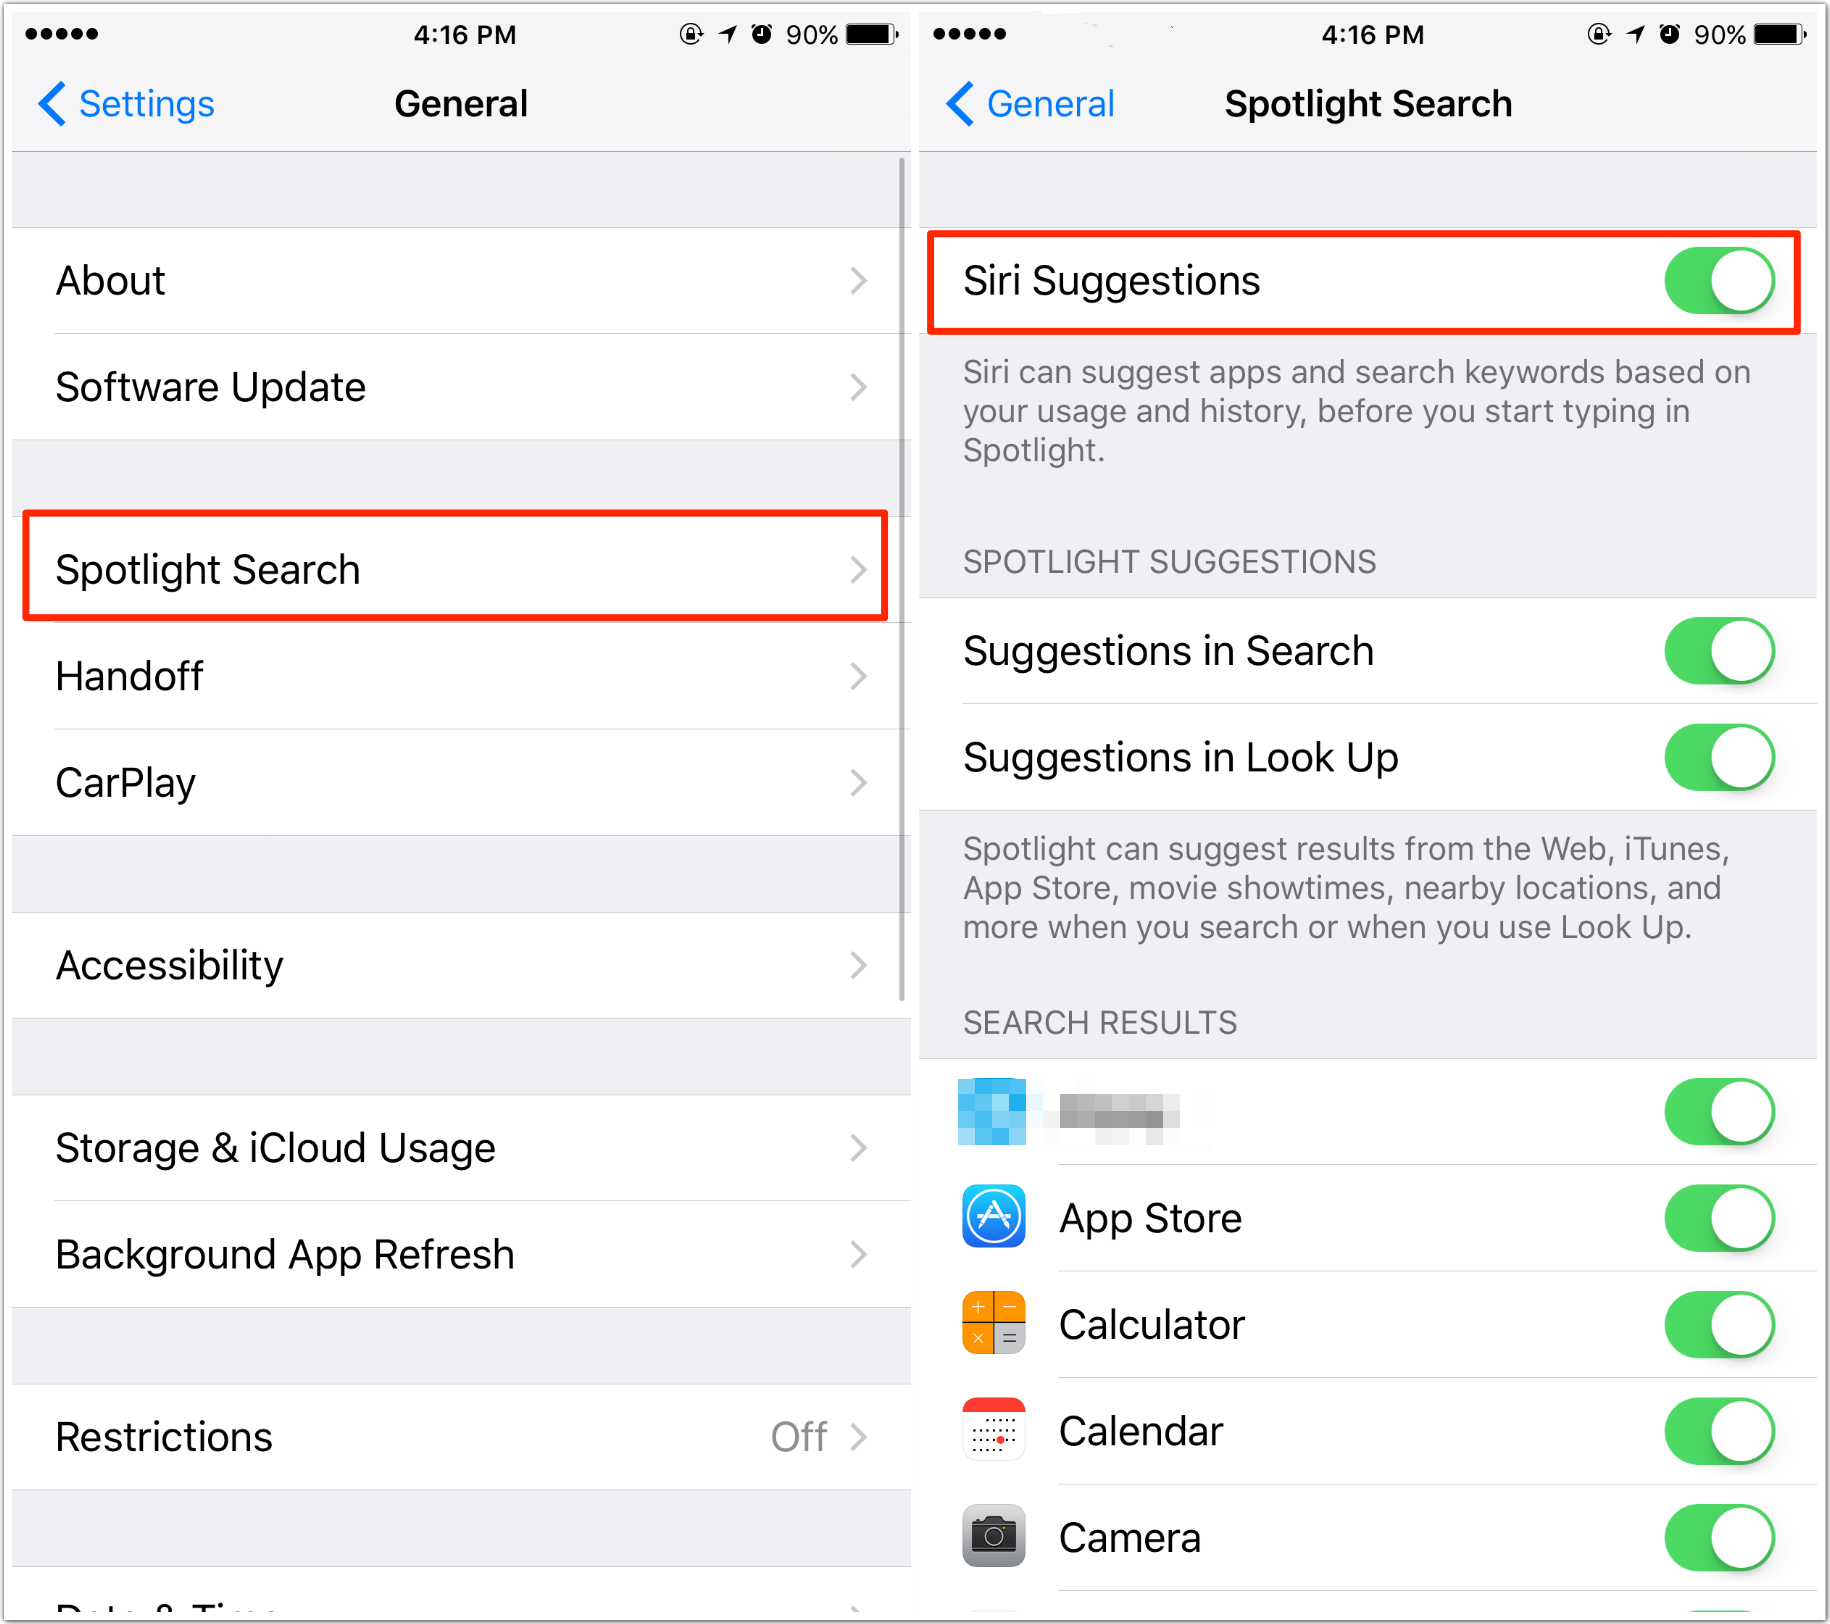 How to Turn Off Siri Suggestions in Spotlight Search on iOS 10/iOS 9